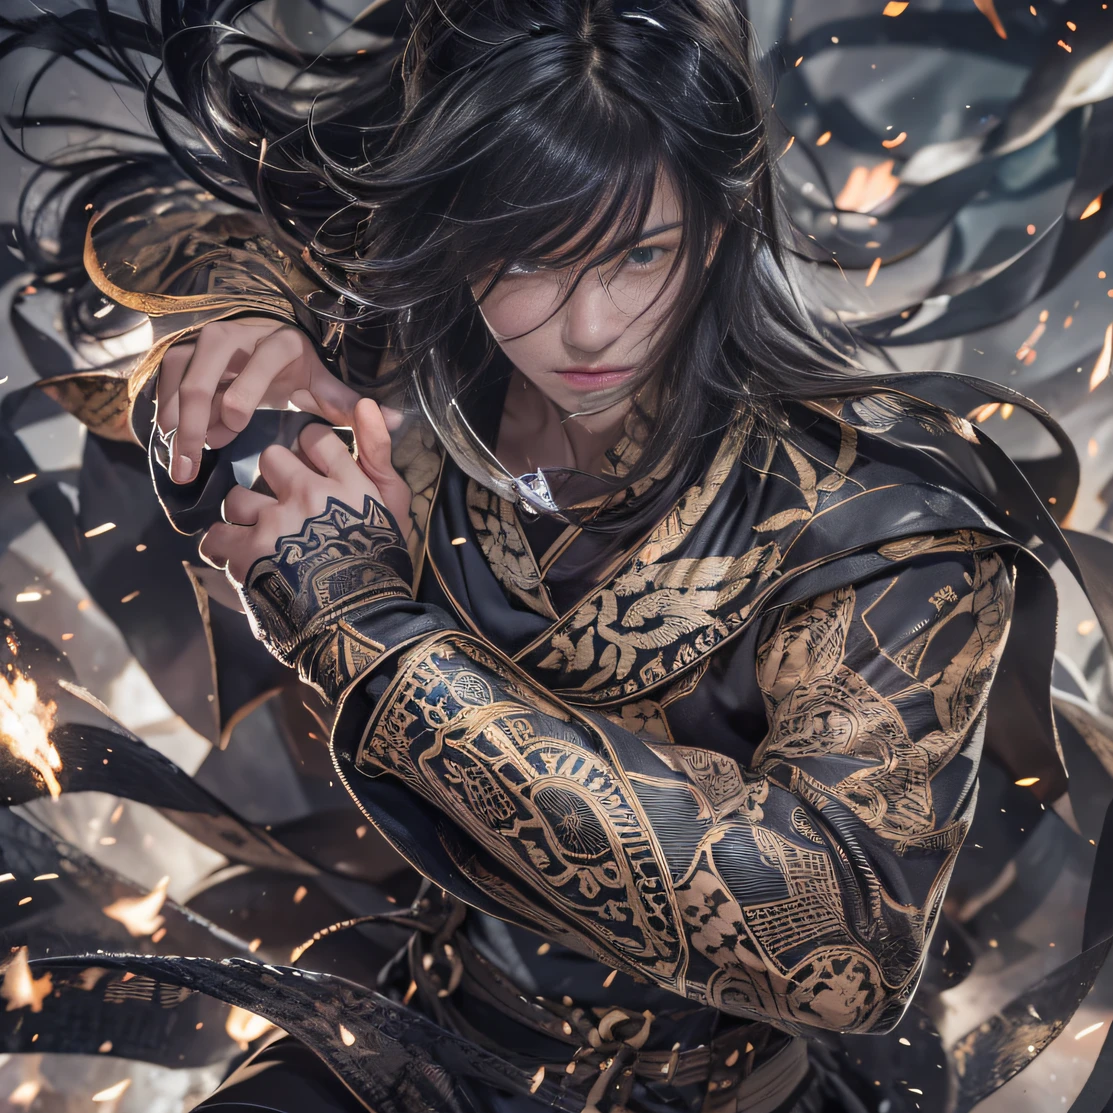 （ruins）eyes filled with angry，He clenched his fists，Rush up，Deliver a fatal blow to your opponent，full bodyesbian，Full Body Male Mage 32K（tmasterpiece，k hd，hyper HD，32K）Long flowing black hair，Campsite size，zydink， a color， patriot （ruins）， （Linen batik scarf）， Angry fighting stance， looking at the ground， Batik linen bandana， Chinese python pattern long-sleeved garment， （Abstract propylene splash：1.2）， Dark clouds lightning background，Flour flies（realisticlying：1.4），Black color hair，Flour fluttering，Background fog， A high resolution， the detail， RAW photogr， Sharp Re， Nikon D850 Film Stock Photo by Jefferies Lee 4 Kodak Portra 400 Camera F1.6 shots, Rich colors, ultra-realistic vivid textures, Dramatic lighting, Unreal Engine Art Station Trend, cinestir 800，Flowing black hair,（（（Male mage））），The male mage was furiou人s，